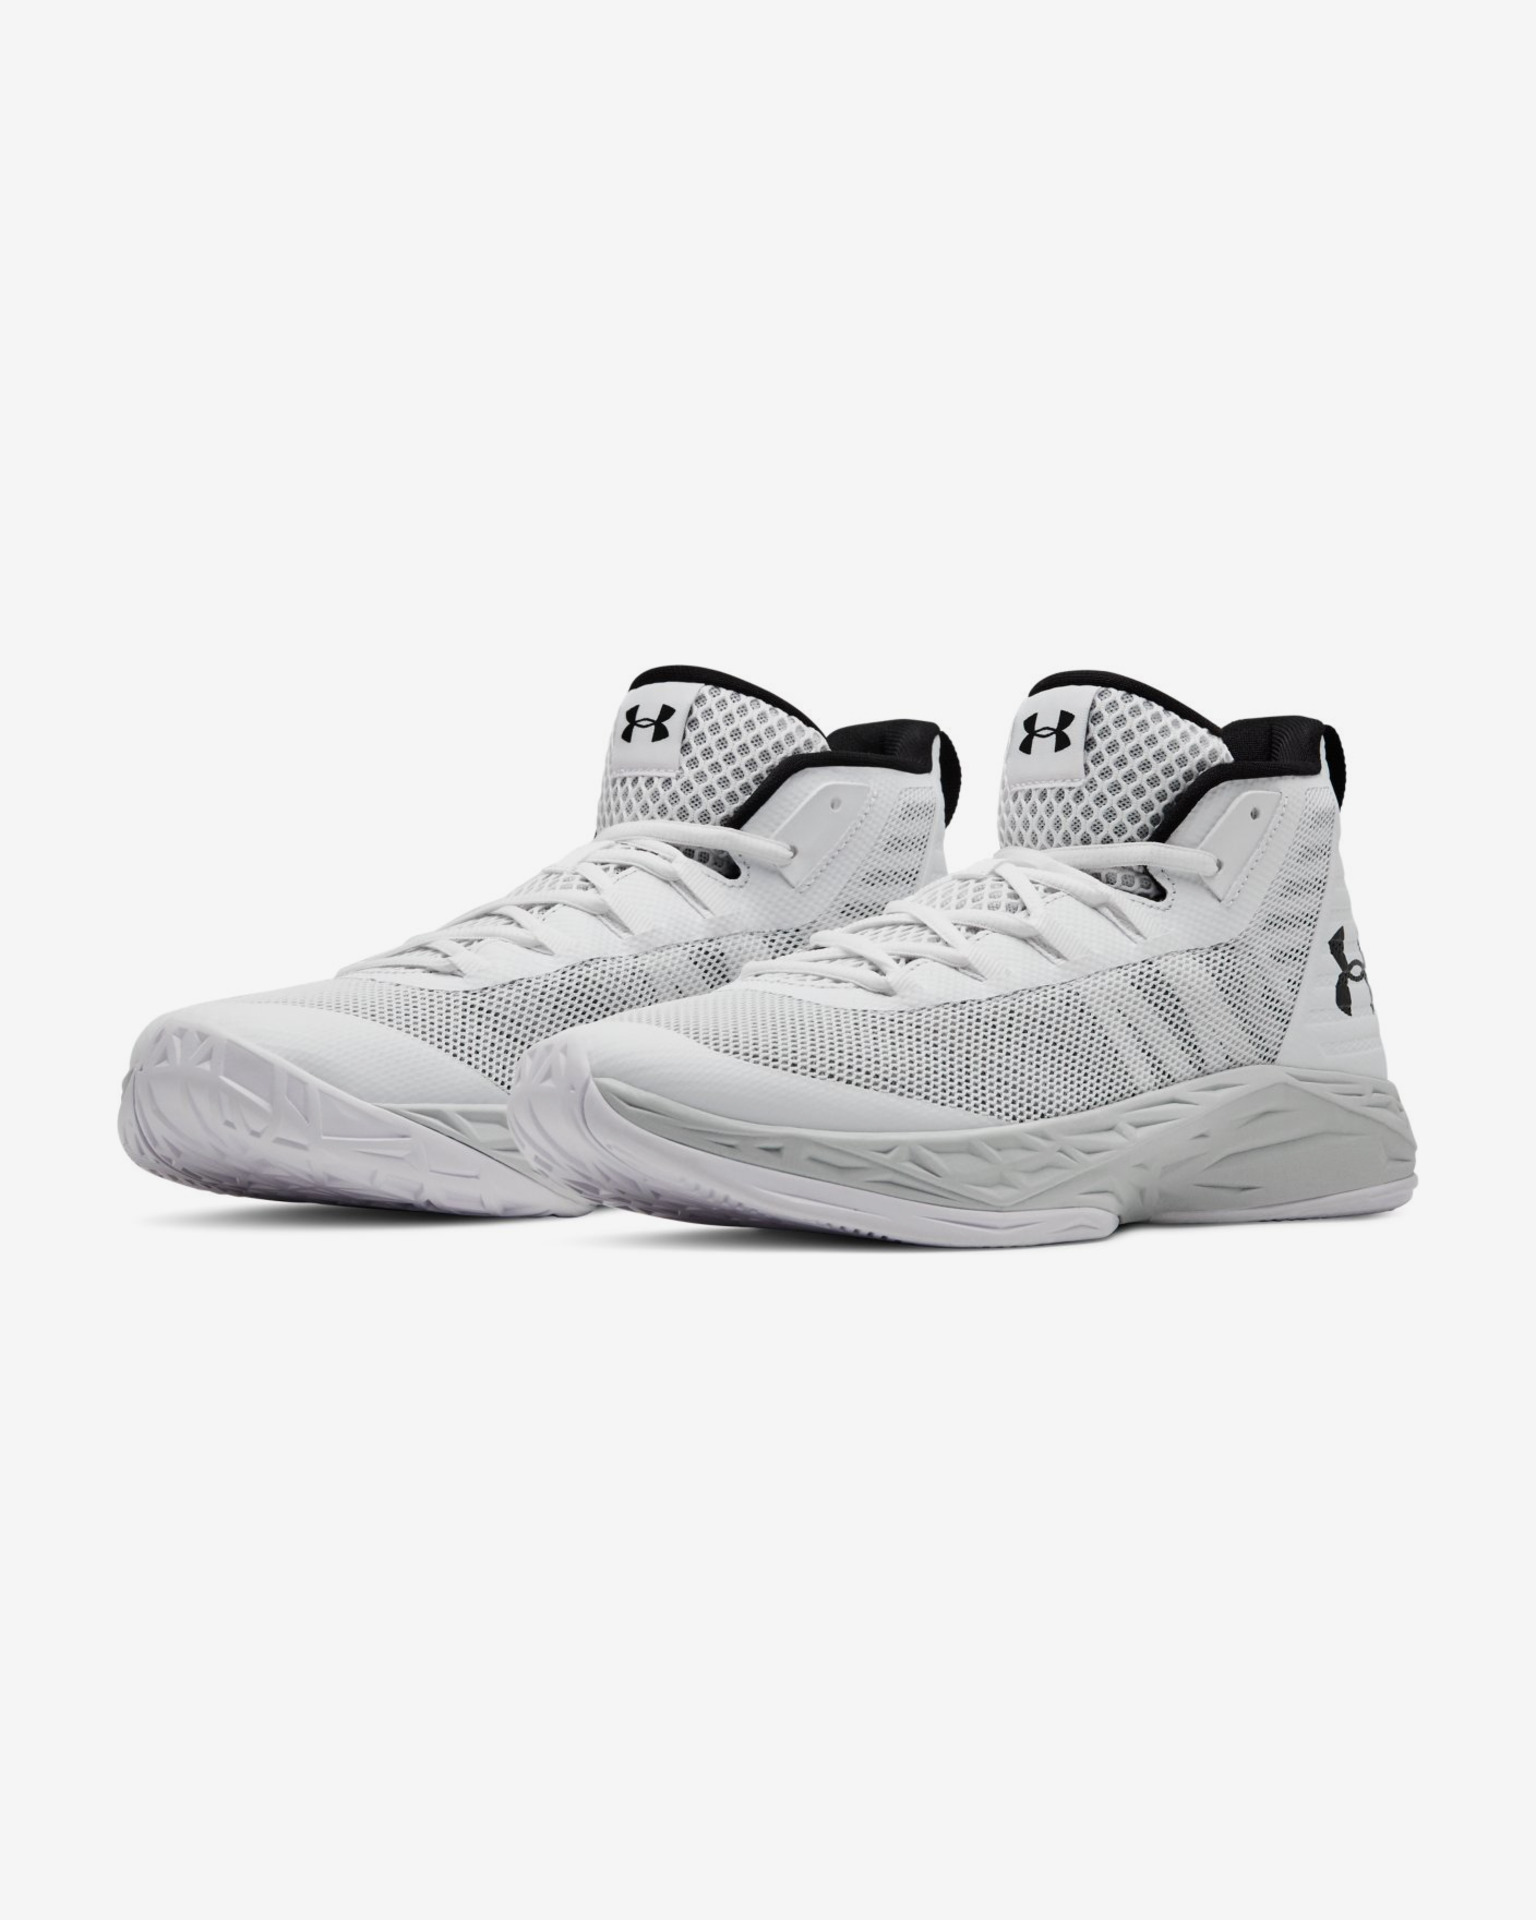 under armour jet mid men's basketball shoes